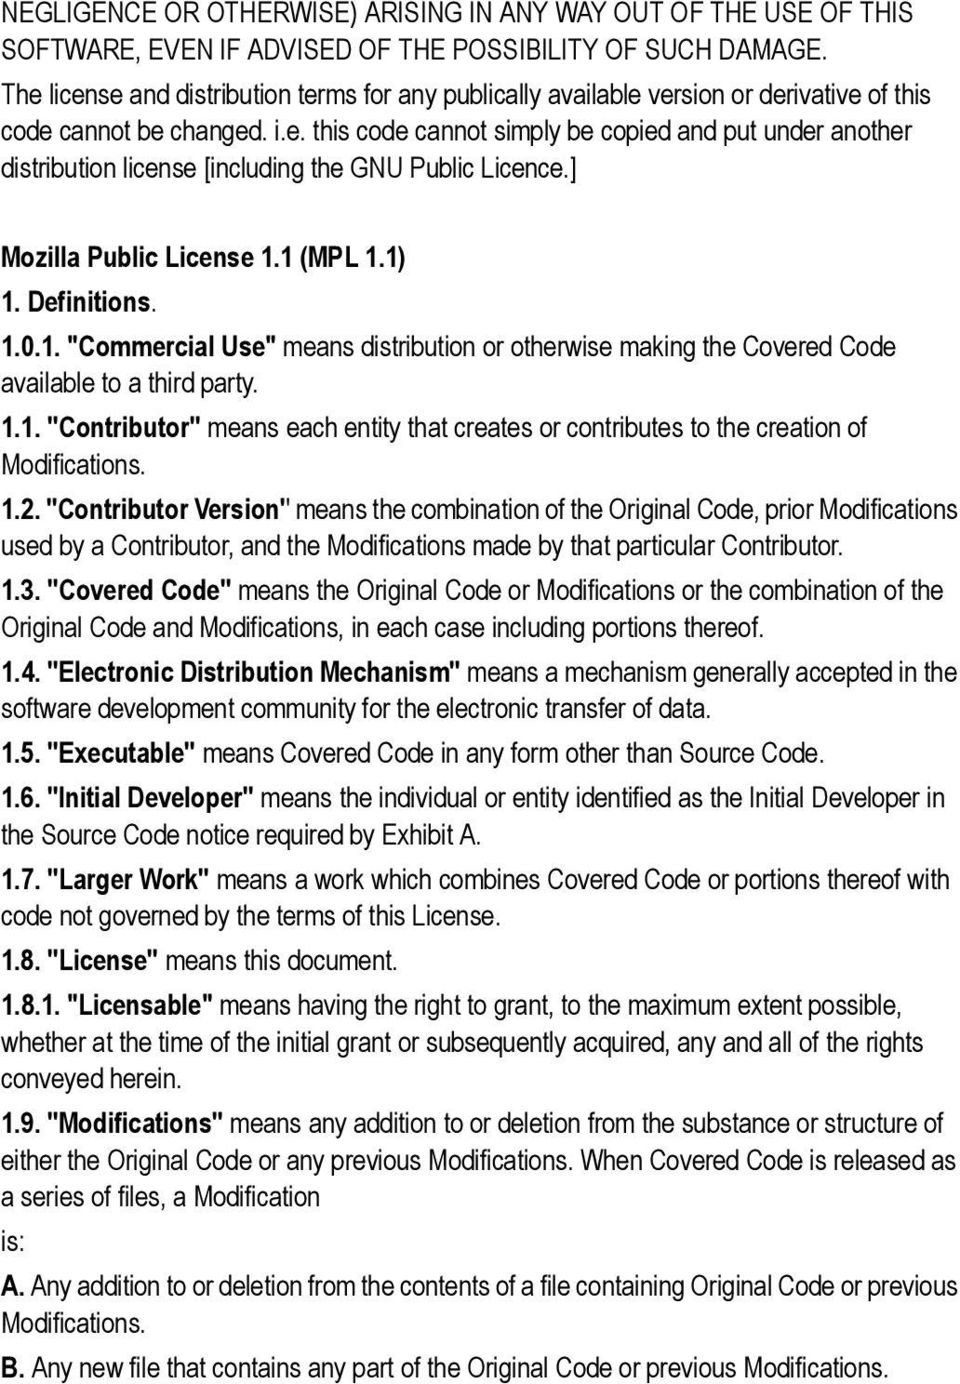 ] Mozilla Public License 1.1 (MPL 1.1) 1. Definitions. 1.0.1. "Commercial Use" means distribution or otherwise making the Covered Code available to a third party. 1.1. ''Contributor'' means each entity that creates or contributes to the creation of Modifications.